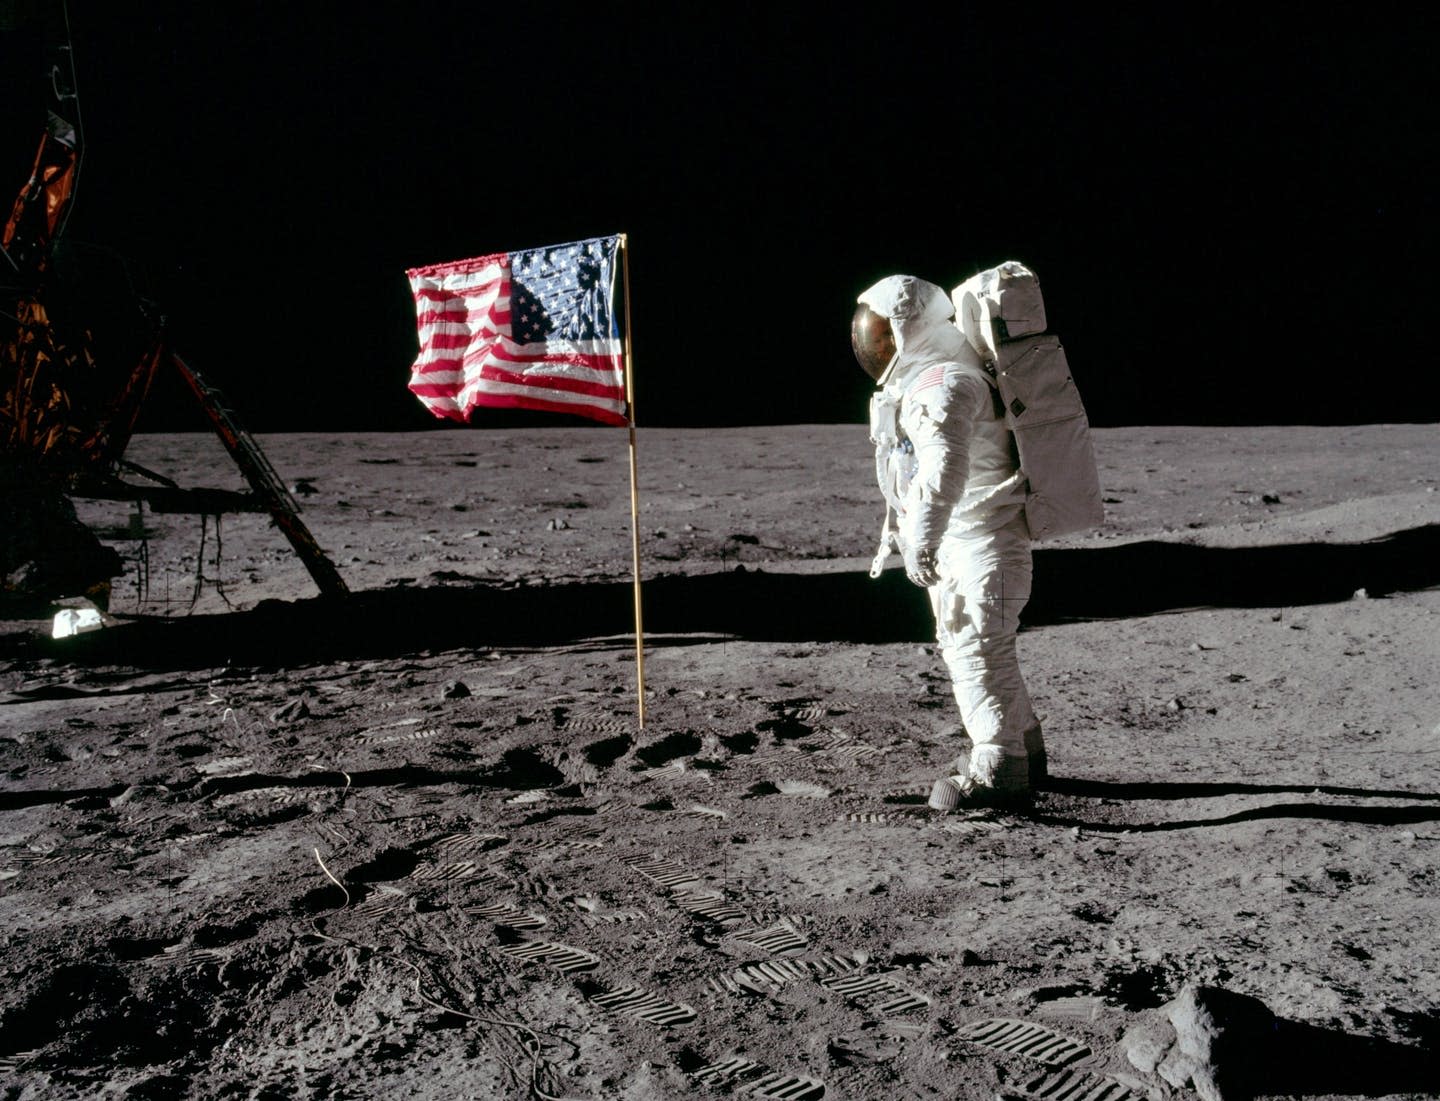 Apollo landers, Neil Armstrong's bootprint and other human artifacts on Moon officially protected by new US law - Yahoo News